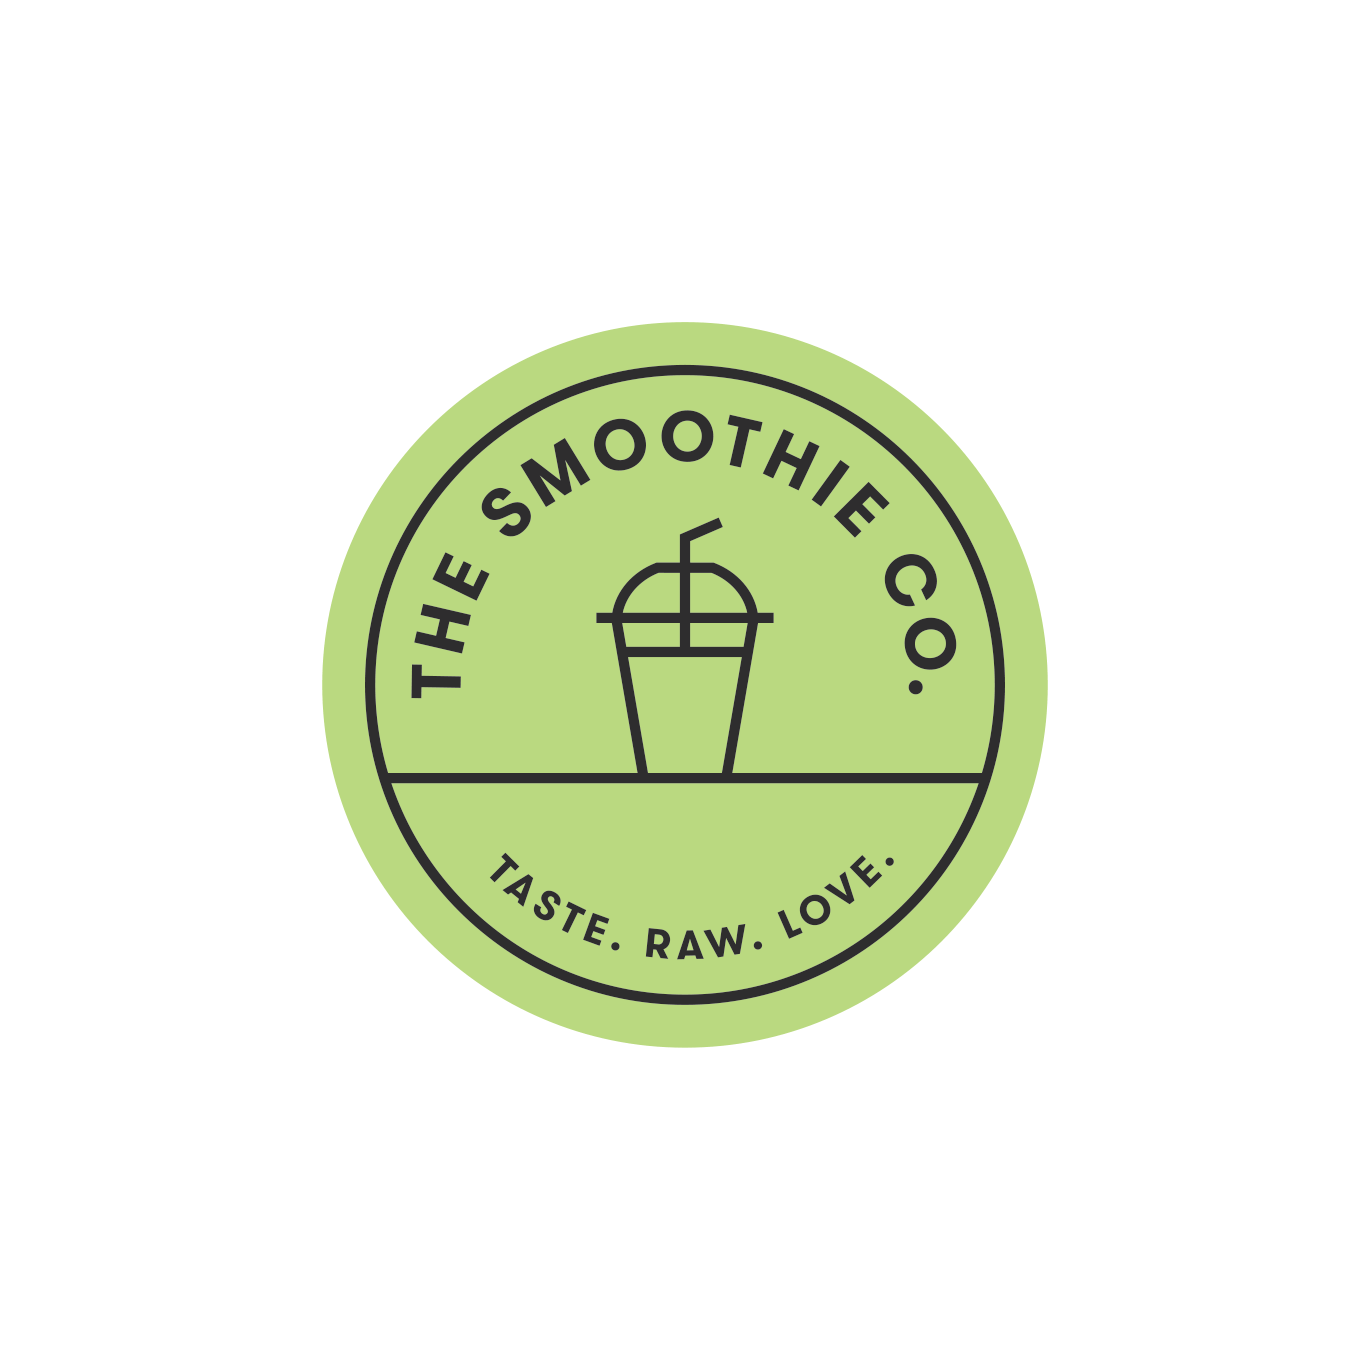 The Smoothie Co - Branding for Health and Wellness Product